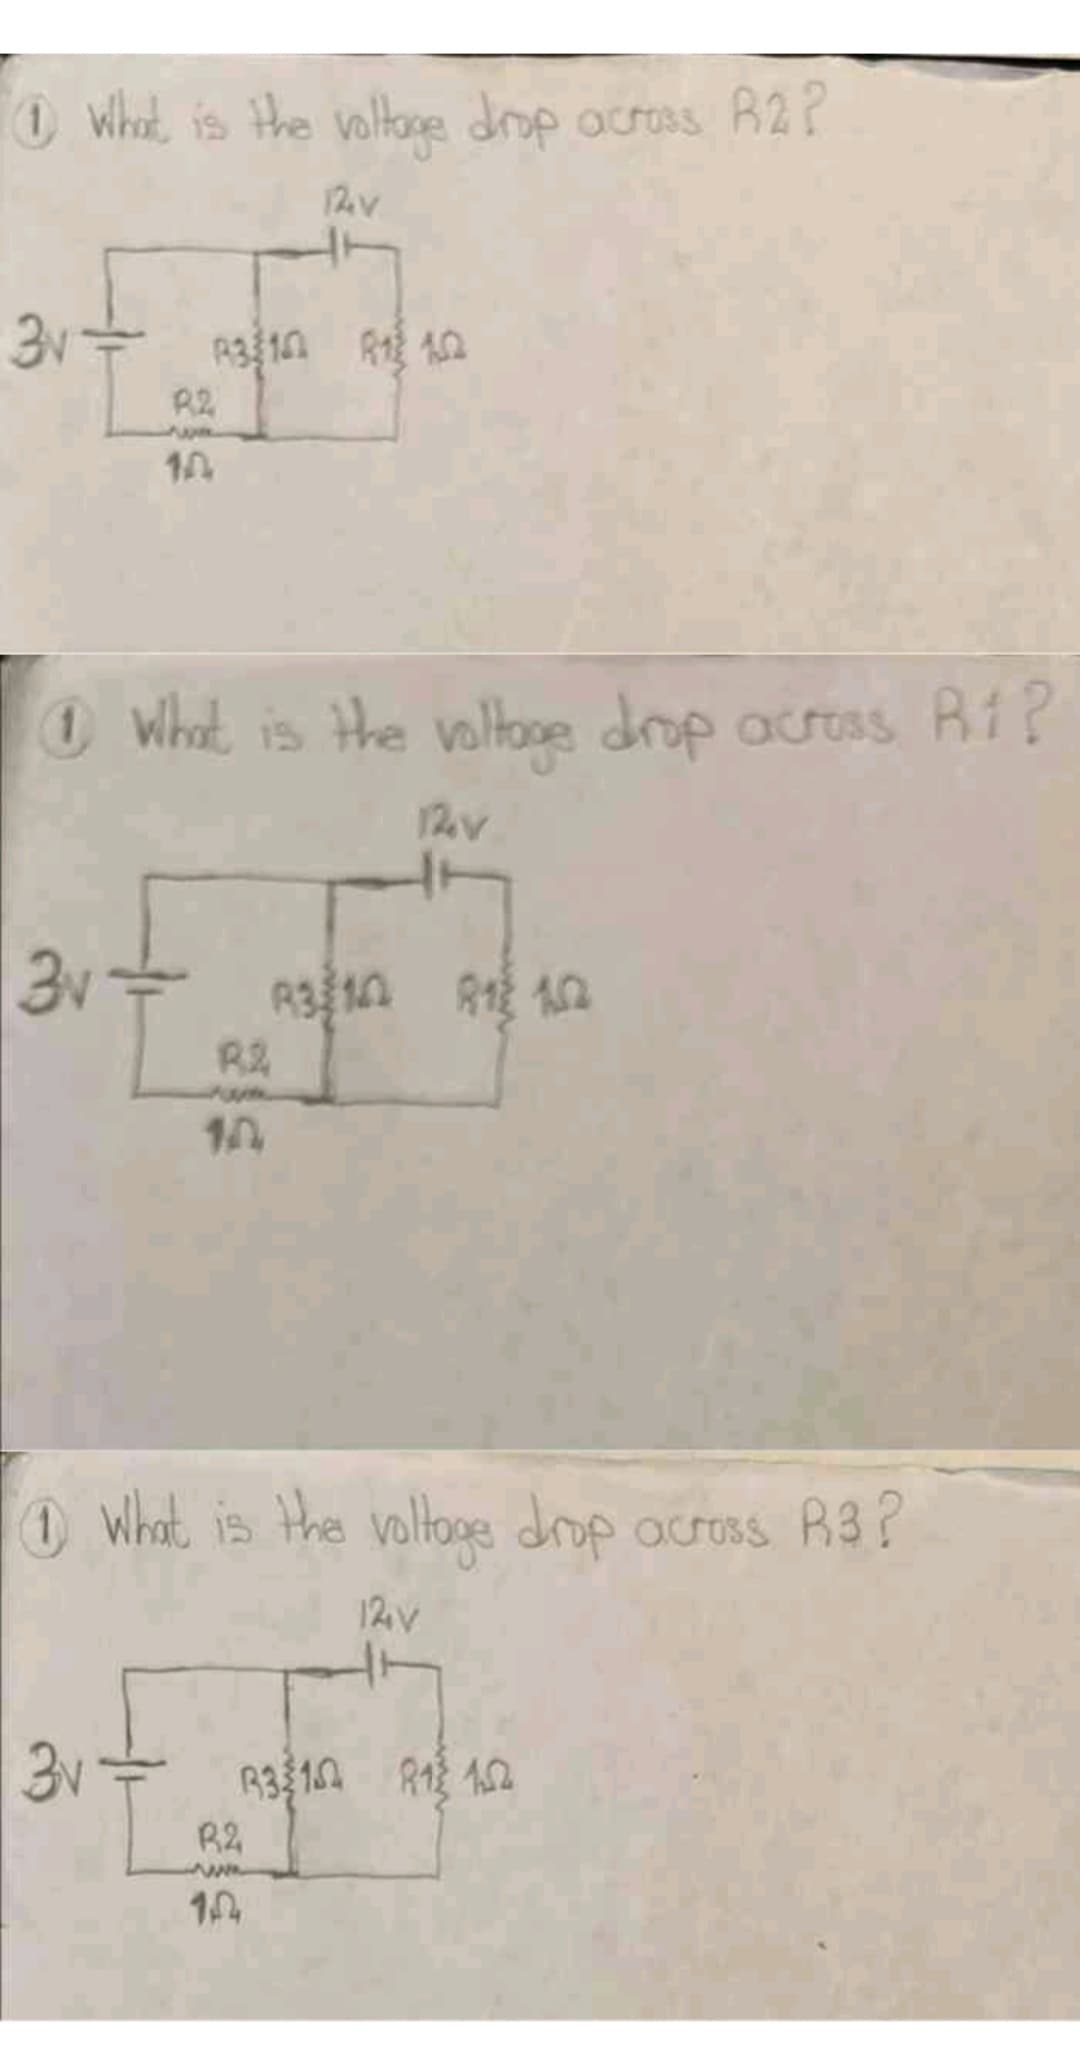 Ⓒ What is the voltage drop across R2?
12v
31 —
3v = 1312 1 10
R2
10
1 What is the voltage drop across R1?
12v
3v =
R3162 81 102
1.0
What is the voltage drop across R3?
12V
3v
R3152 R13 1652
R2
B2
154